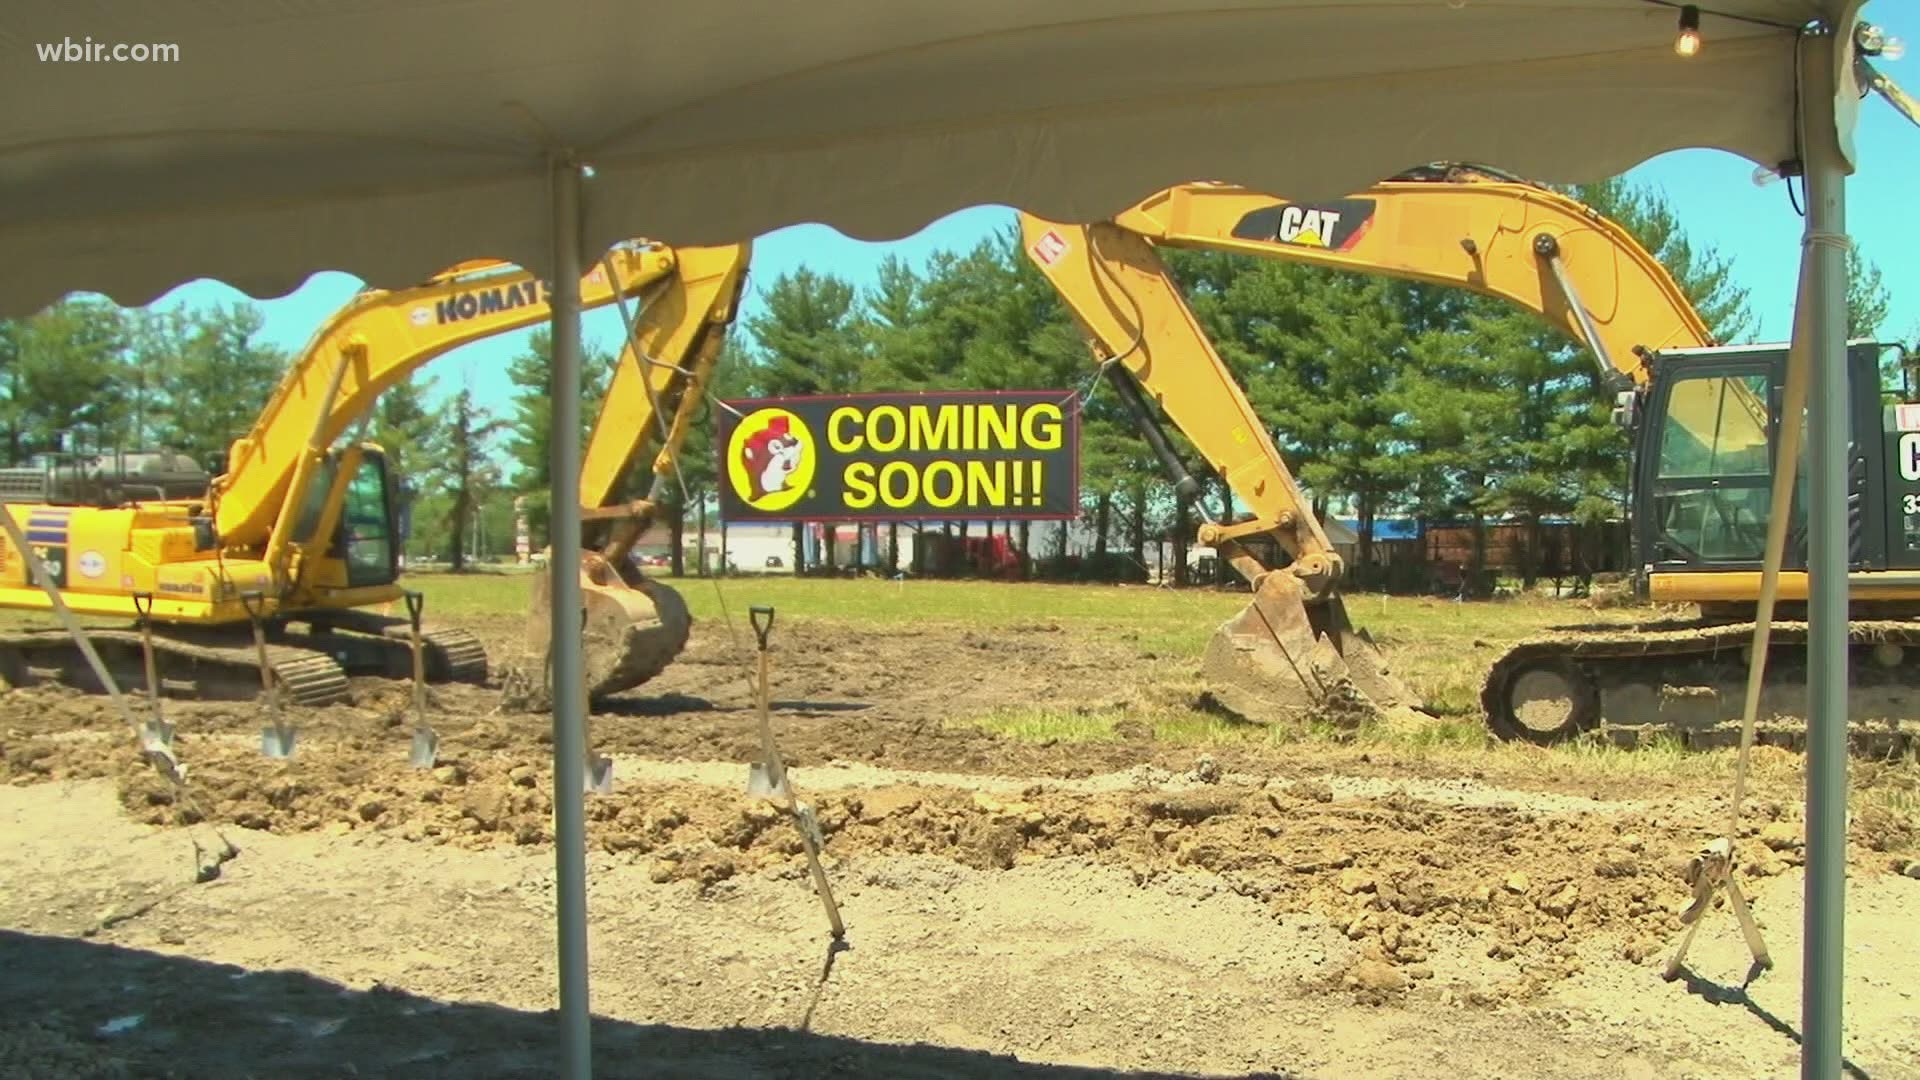 Buc-ee's travel center will be located on Genesis Road in Crossville.